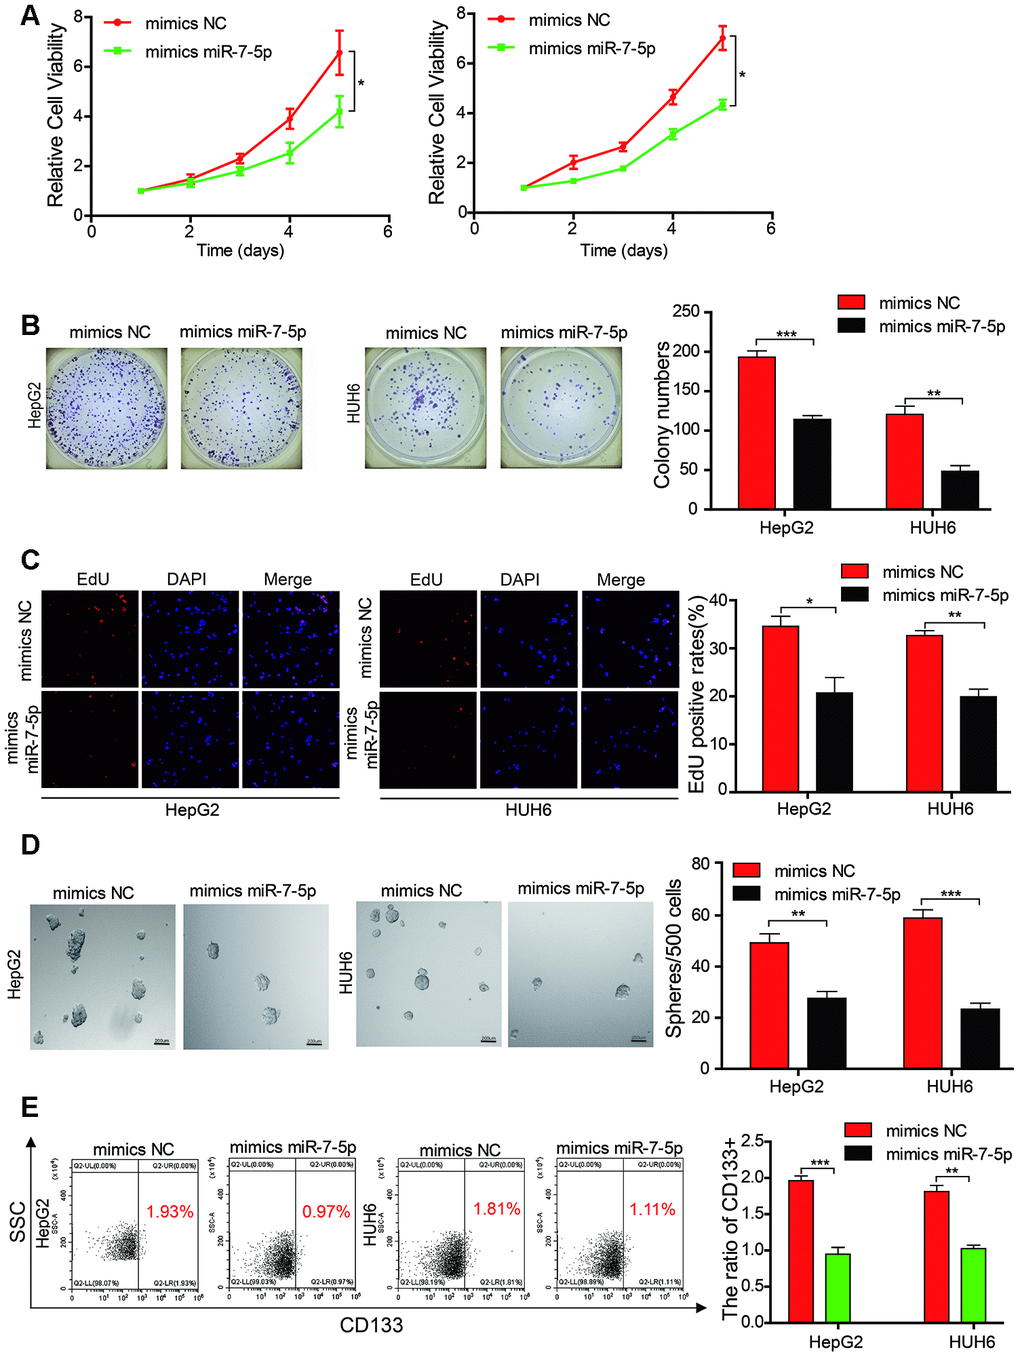 Mir-7-5p affects the proliferation and stemness abilities of HB cells. (A–C) The cell proliferative ability of HB cells that were transfected with miR-7-5p was assessed by the Cell Counting Kit-8 (CCK-8), colony formation assay, and EdU assay; (D) The stemness of cancer stem cells (CSCs) was assessed using the sphere-forming assay after the HepG2 and HUH6 cells were transfected with miR-7-5p; (E) The proportion of CD133+ cells was determined by flow cytometric analysis after miR-7-5p was overexpressed in HB cells. Scale bar, 200 μm. Data are presented as the mean ± SEM of three experiments. *P 